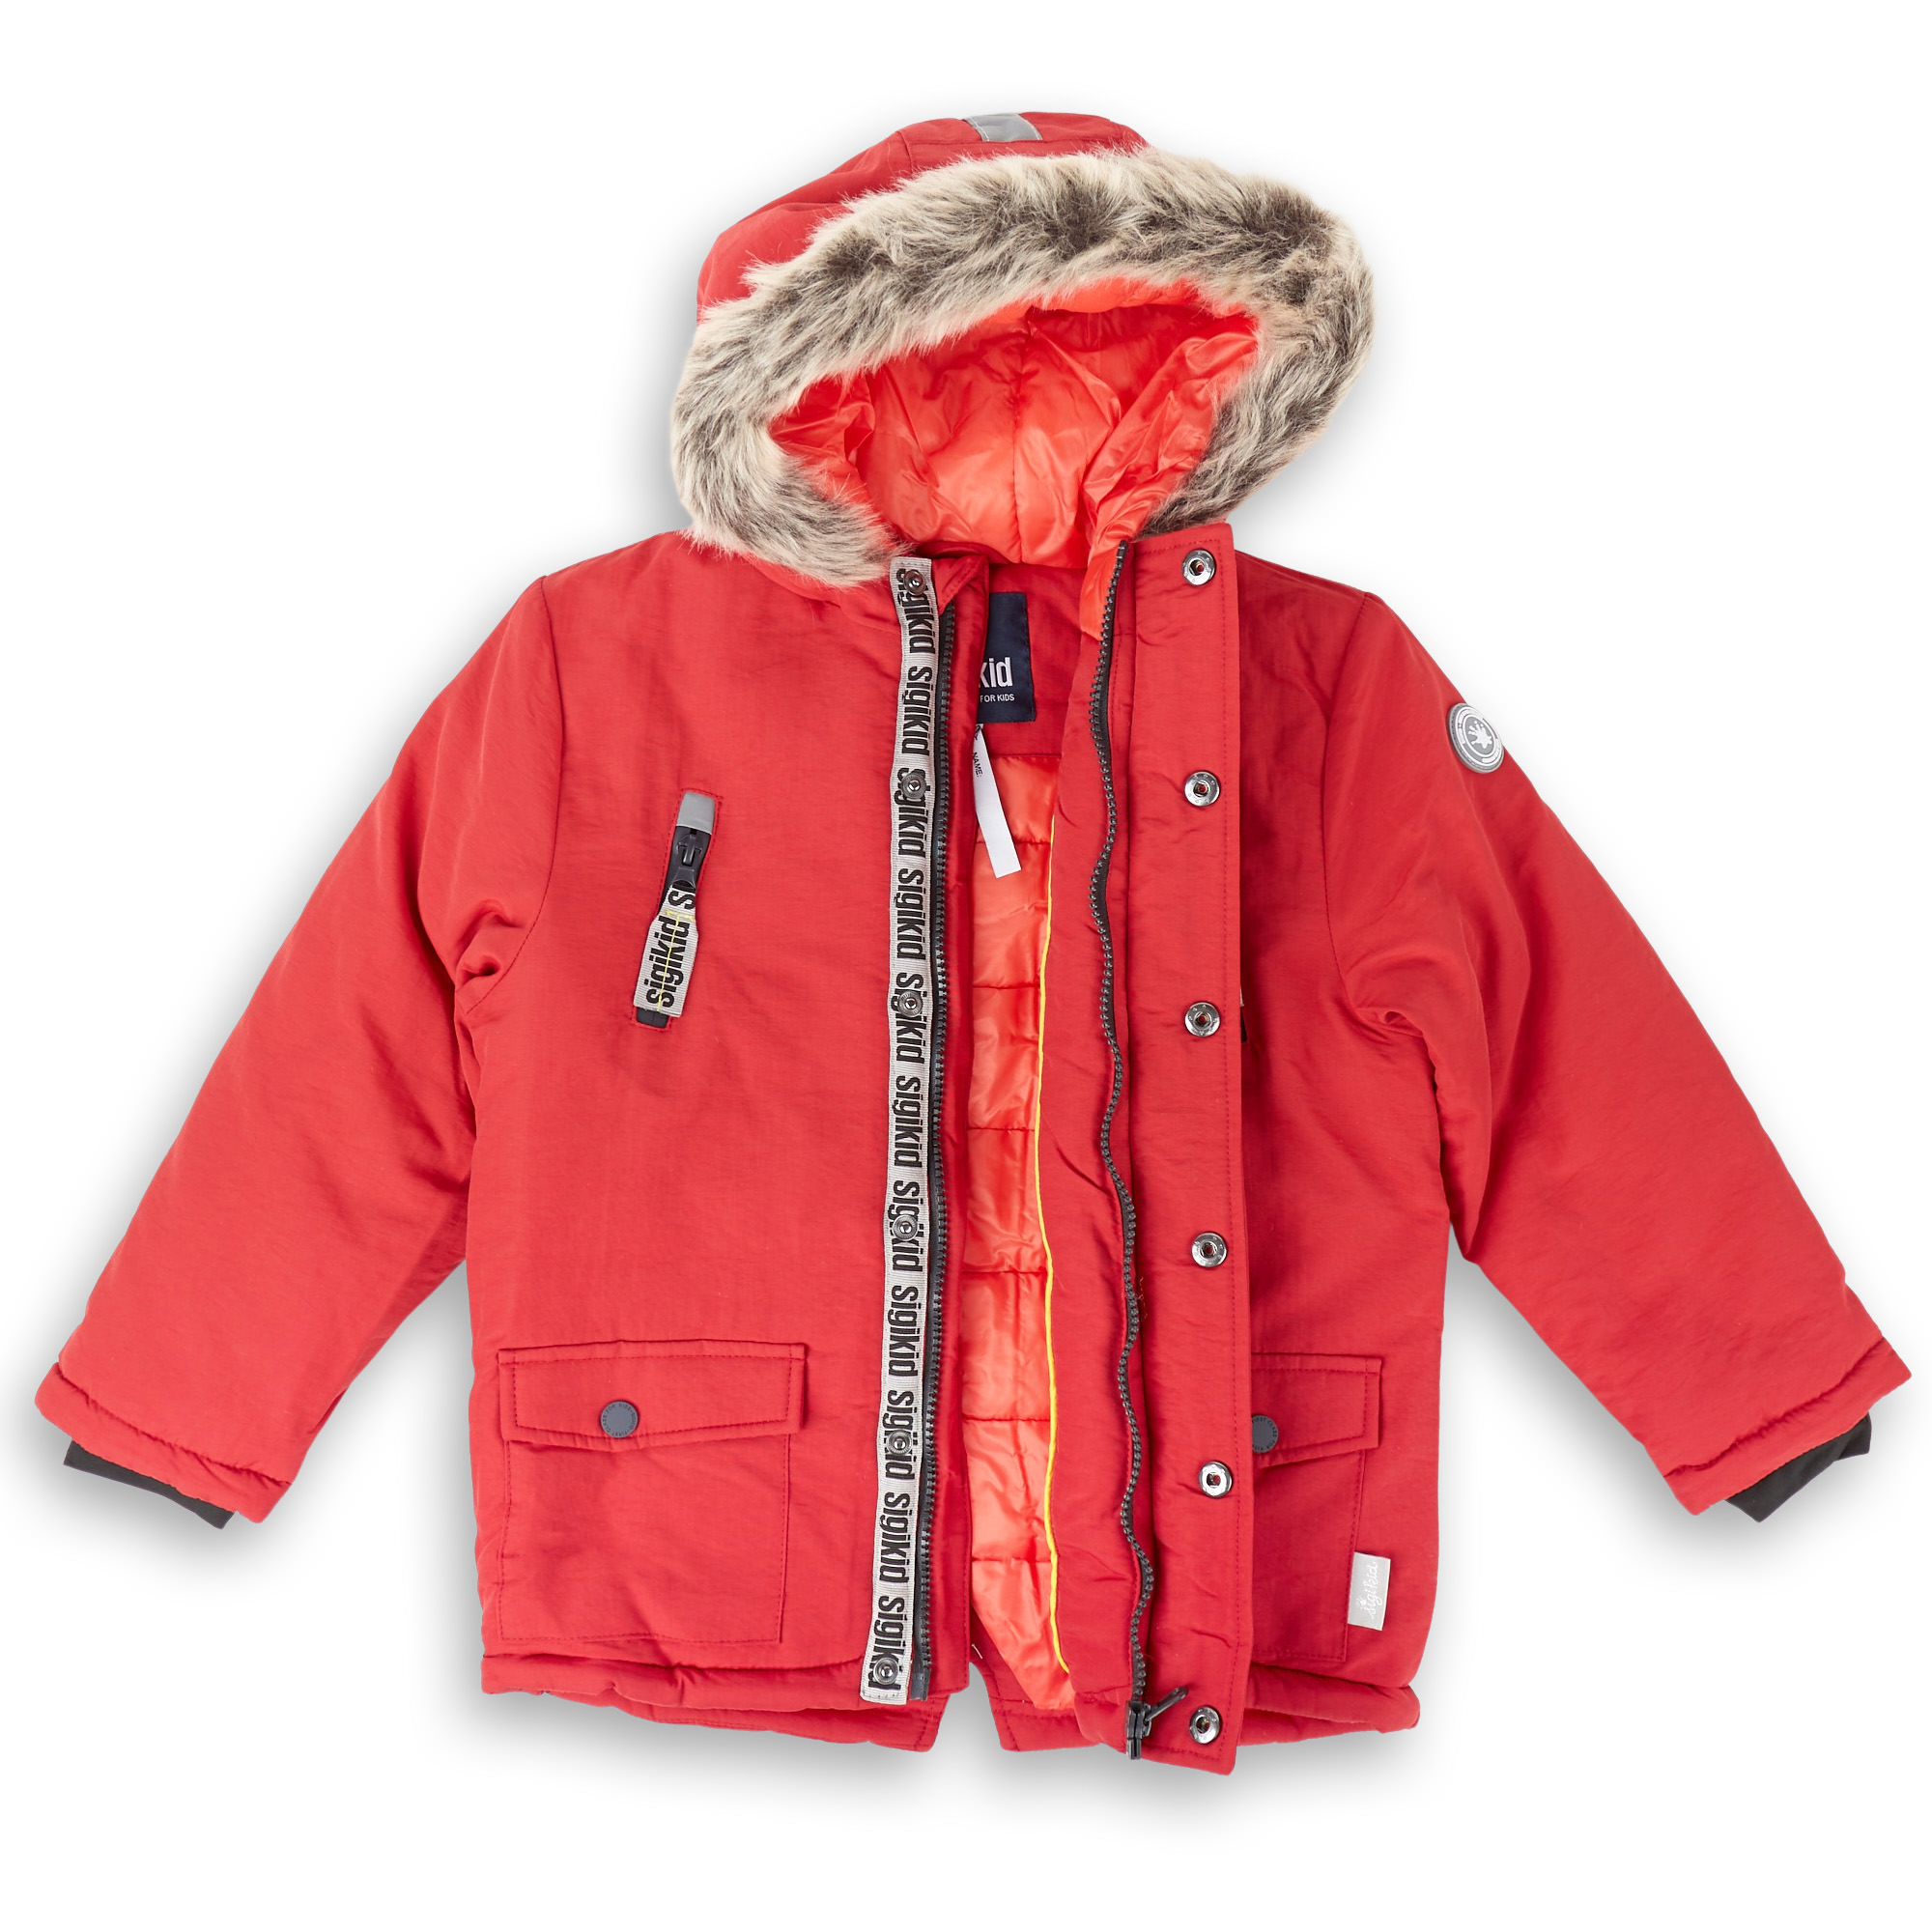 Insulated kids' winter jacket, hooded, red